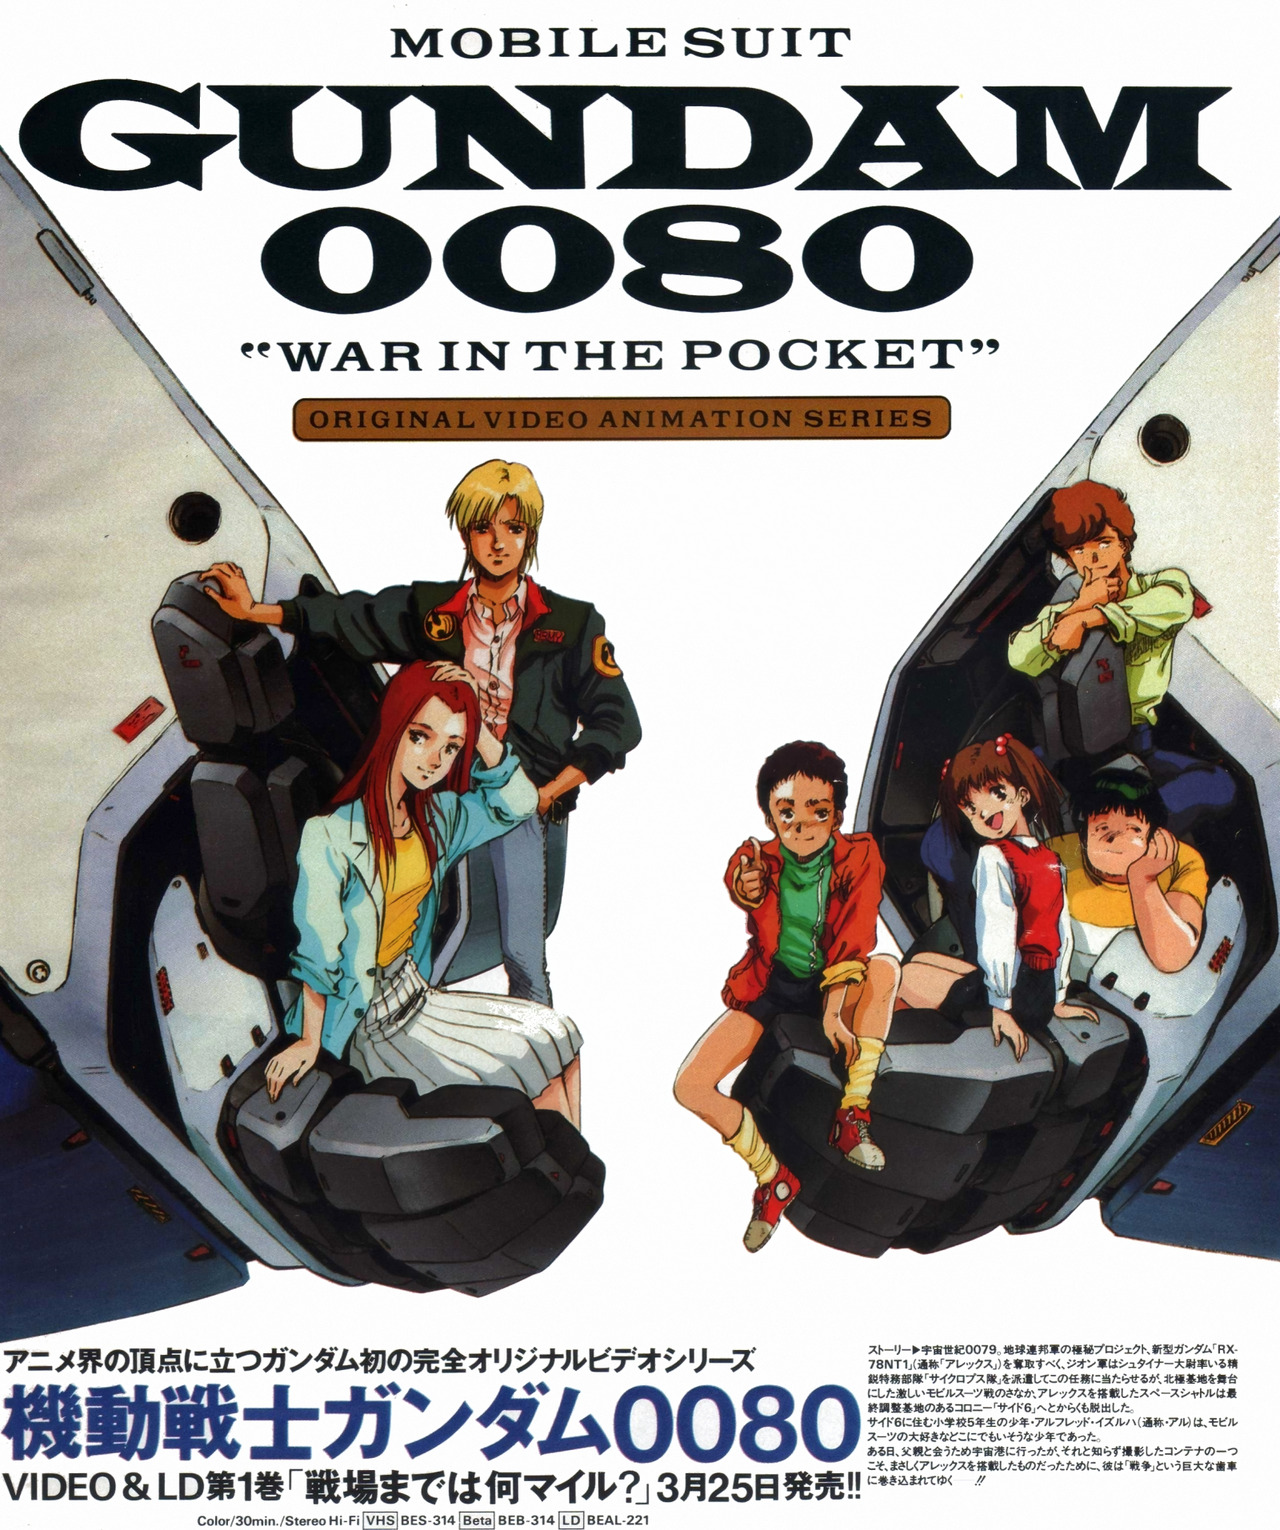 Anim Archive Mobile Suit Gundam 0080 War In The Pocket By